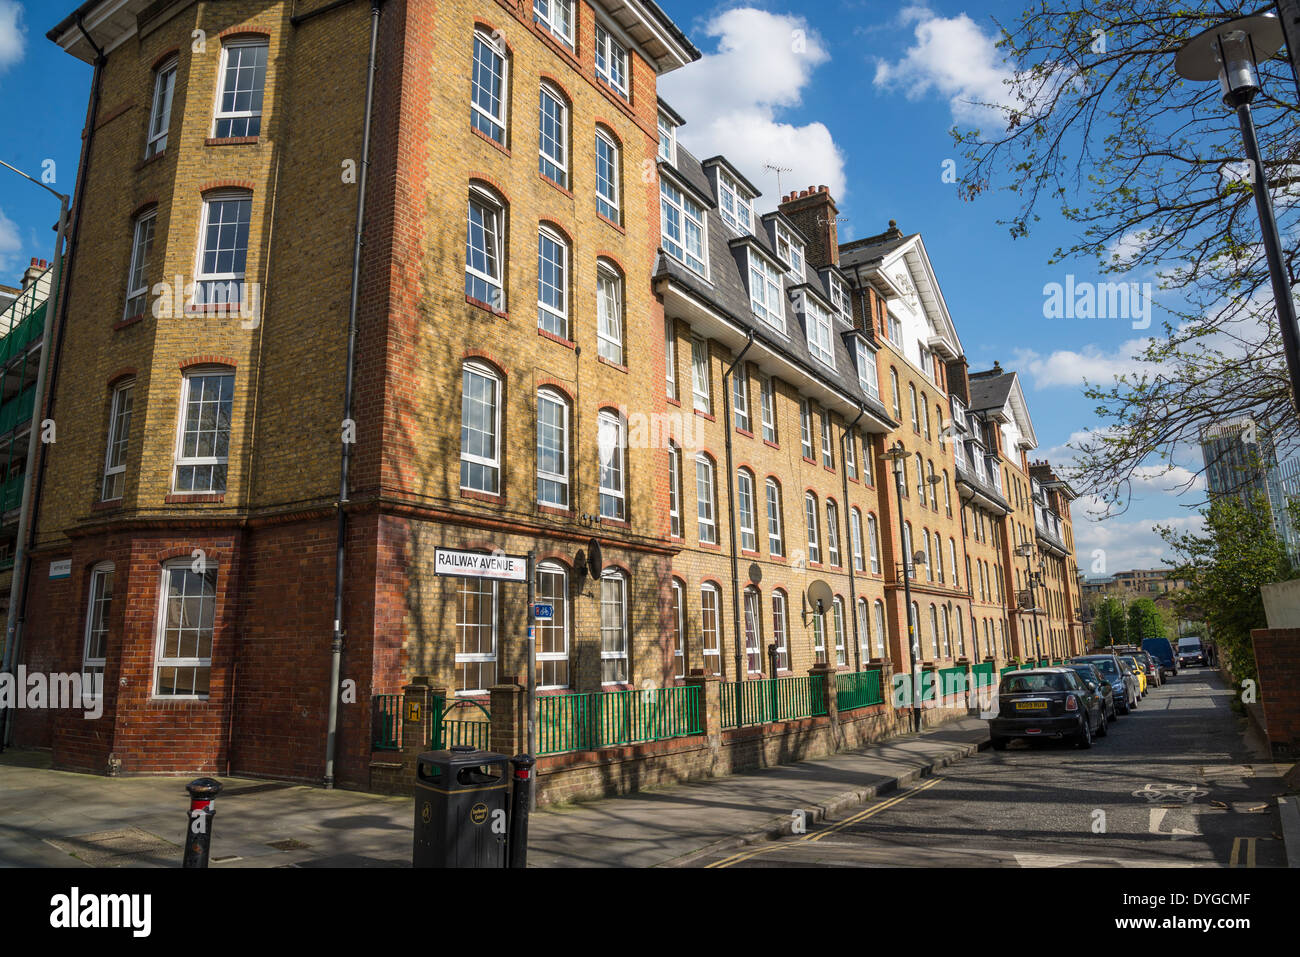 Residential block of flats in Rotherhithe, London, UK Stock Photo